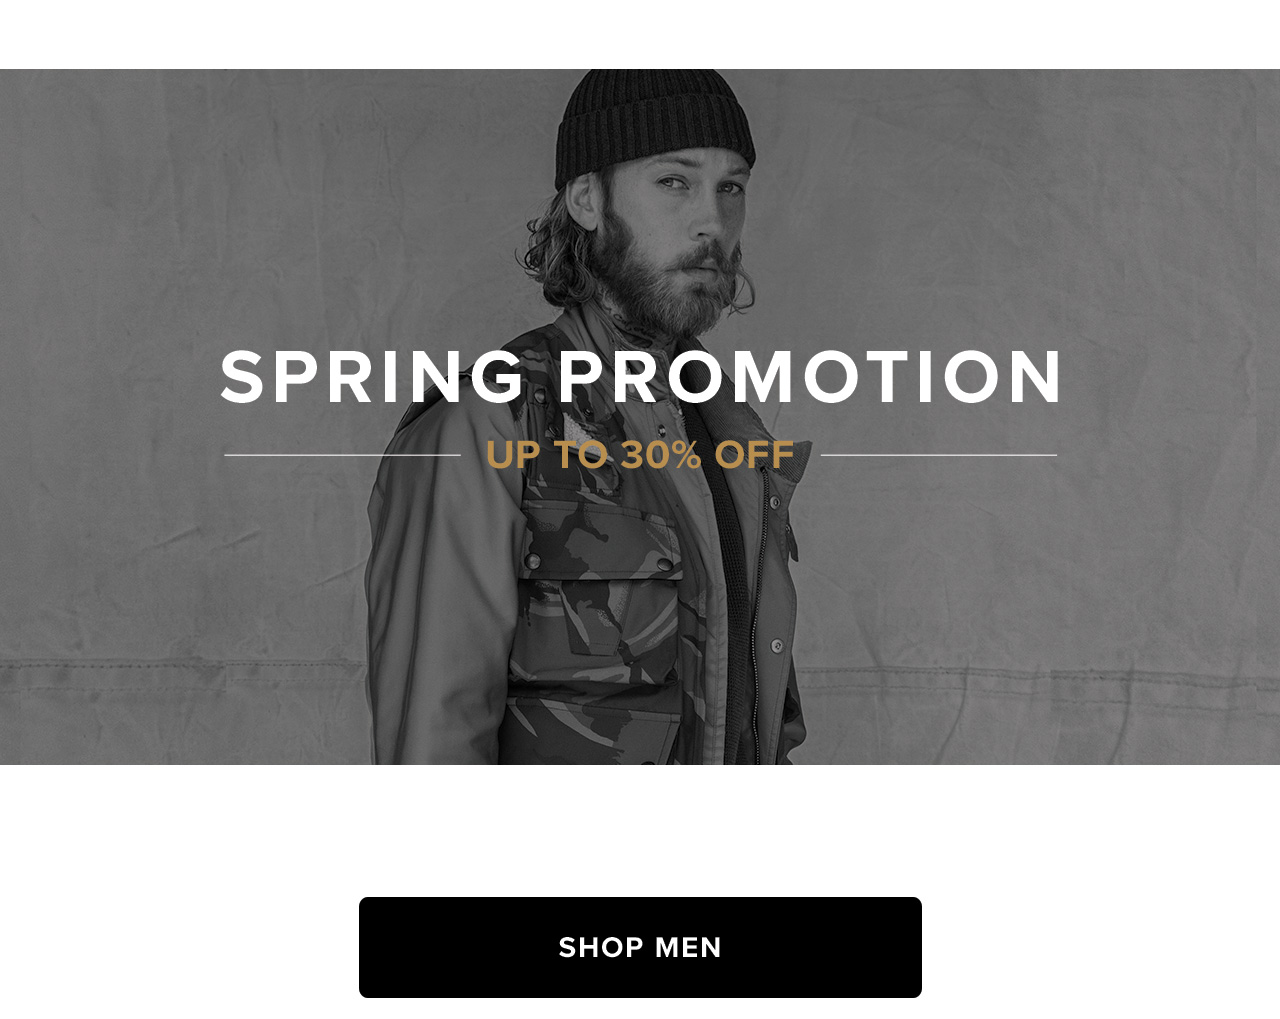 Up to 30% off selected styles